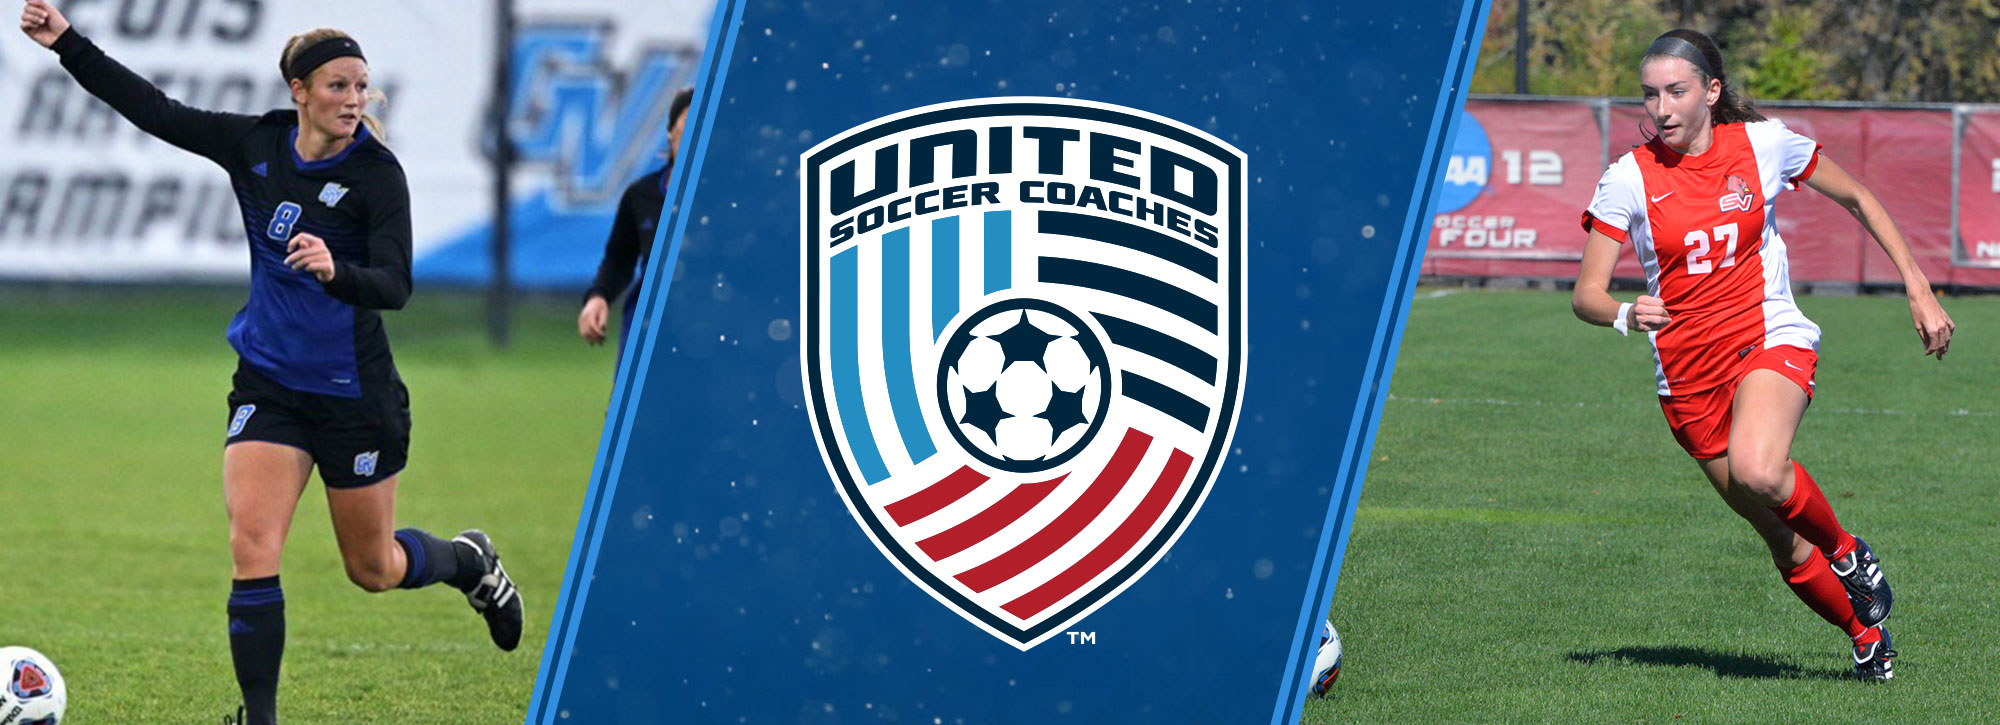 Grand Valley State No. 3, Saginaw Valley No. 13 in Latest United Soccer Coaches Women's Soccer Rankings